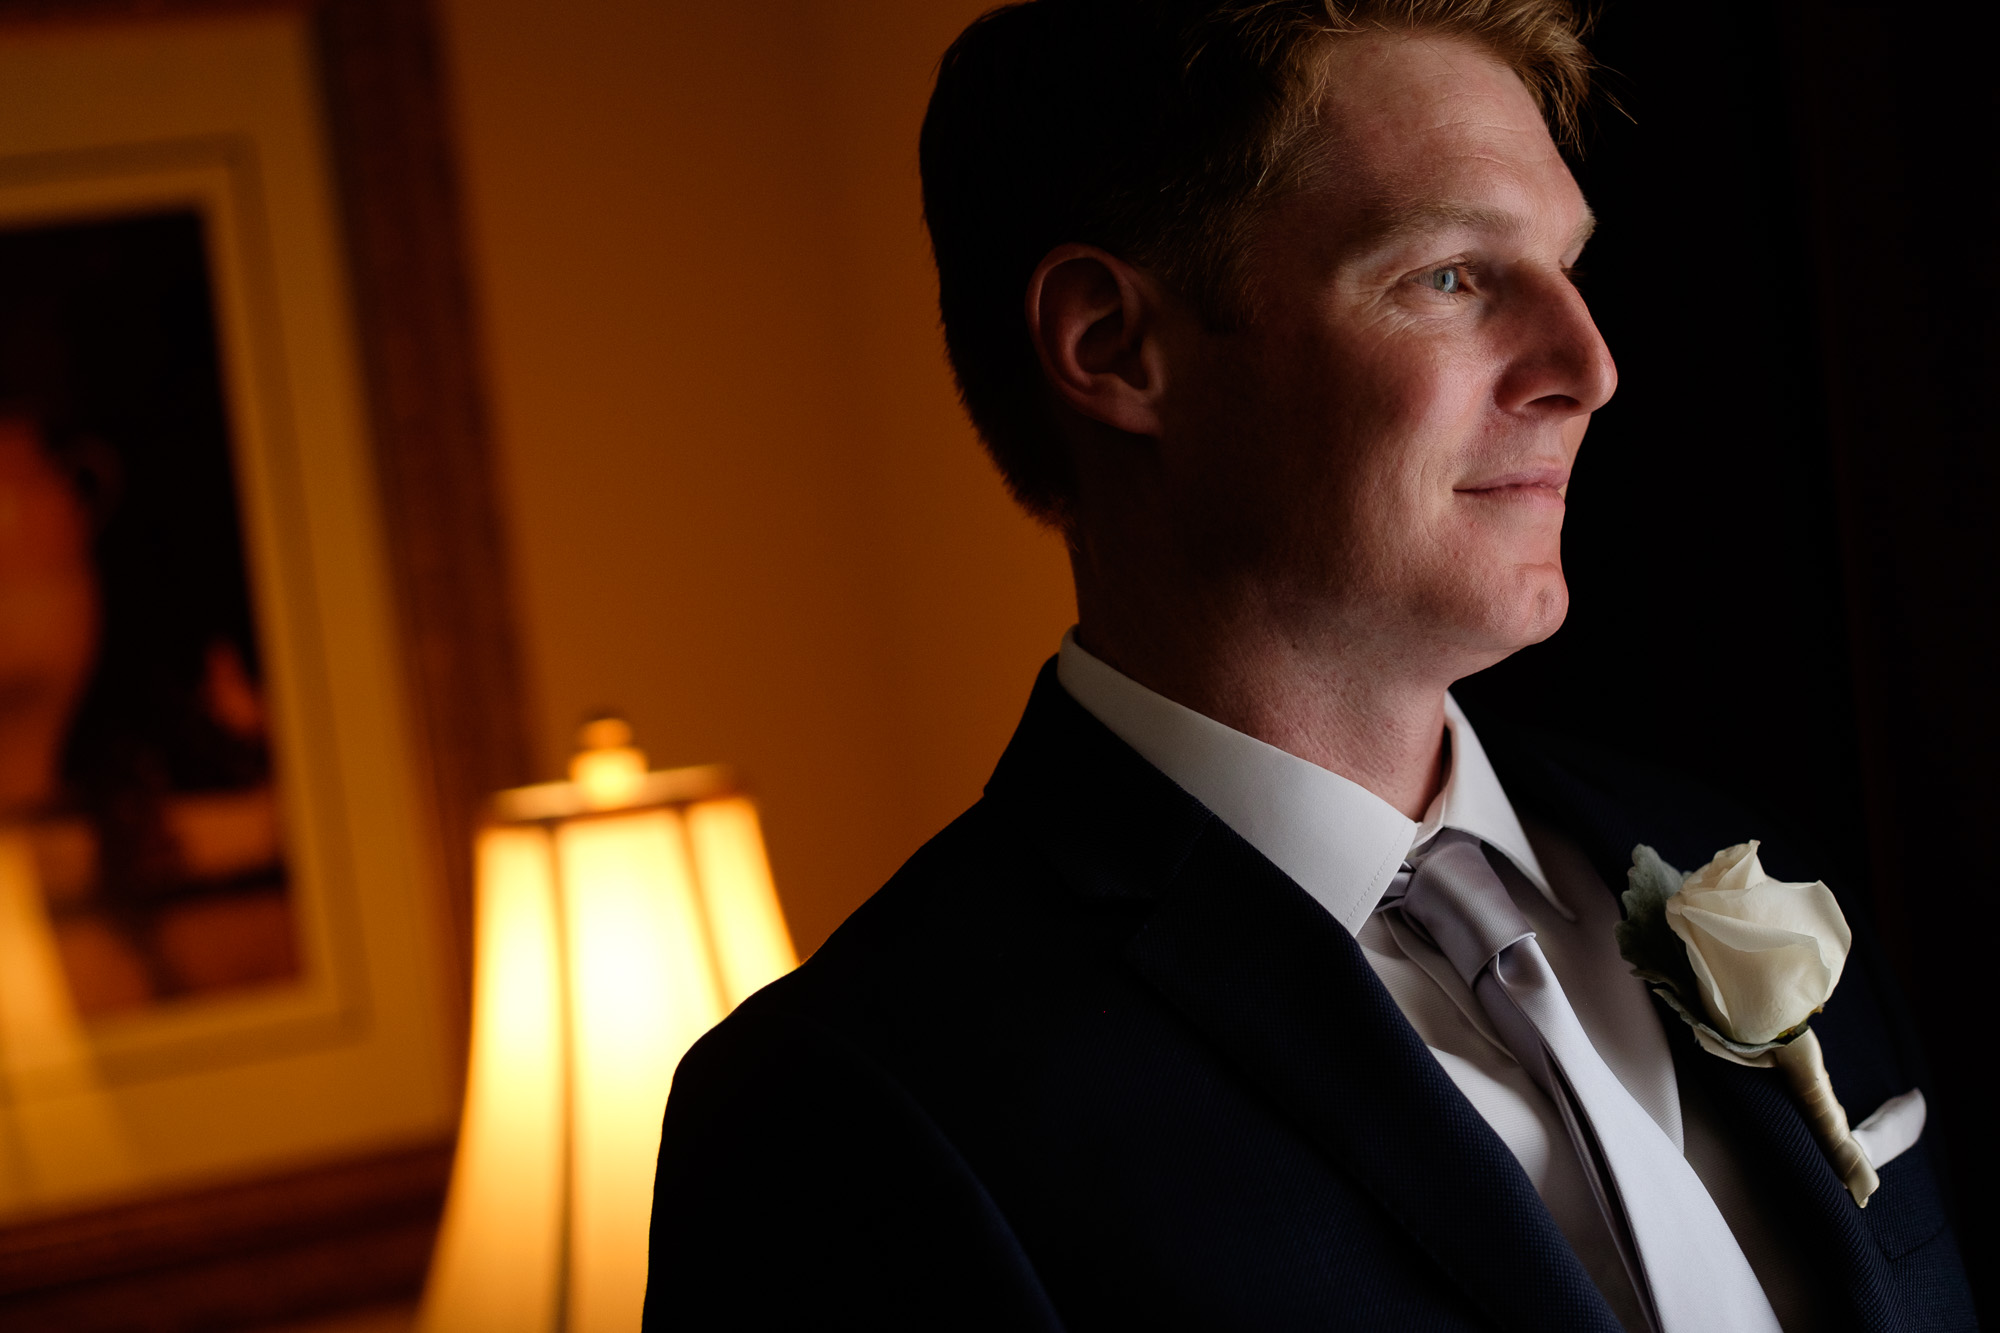  Chris poses for a portrait at his family home before his wedding at the Paletta Mansion in Mississauga. 